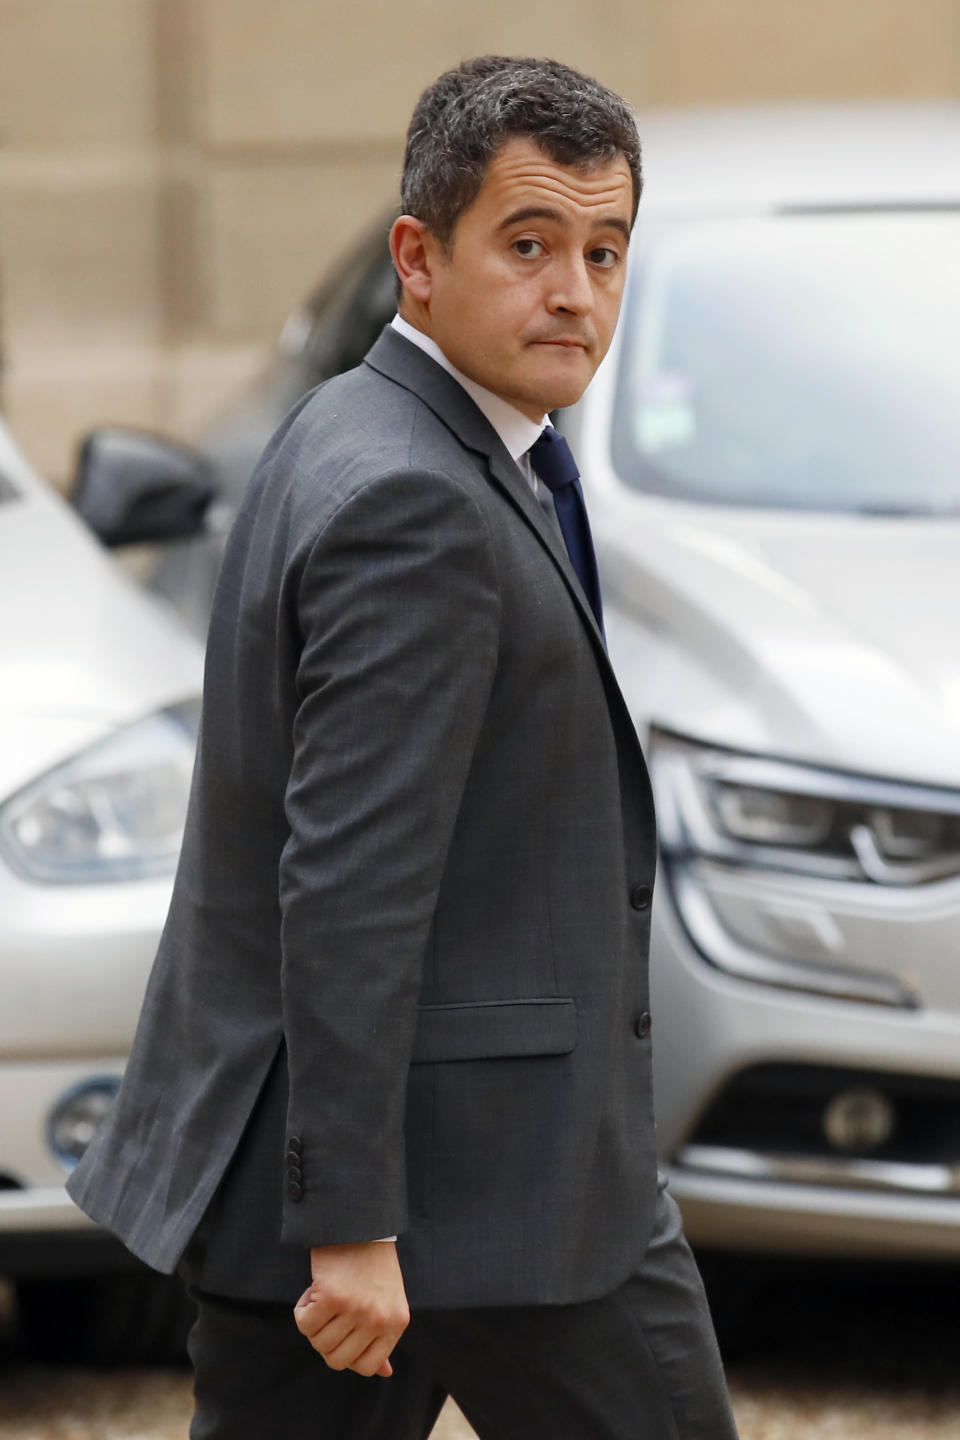 French Budget Minister Gerald Darmanin leaves after a meeting with French President Emmanuel Macron and local, national political leaders, unions, business leaders and others to hear their concerns after four weeks of protests, at the Elysee Palace in Paris, Monday, Dec. 10, 2018. French President Emmanuel Macron is preparing to speak to the nation at last after increasingly violent "yellow vest" protests against his leadership. (AP Photo/Francois Mori)